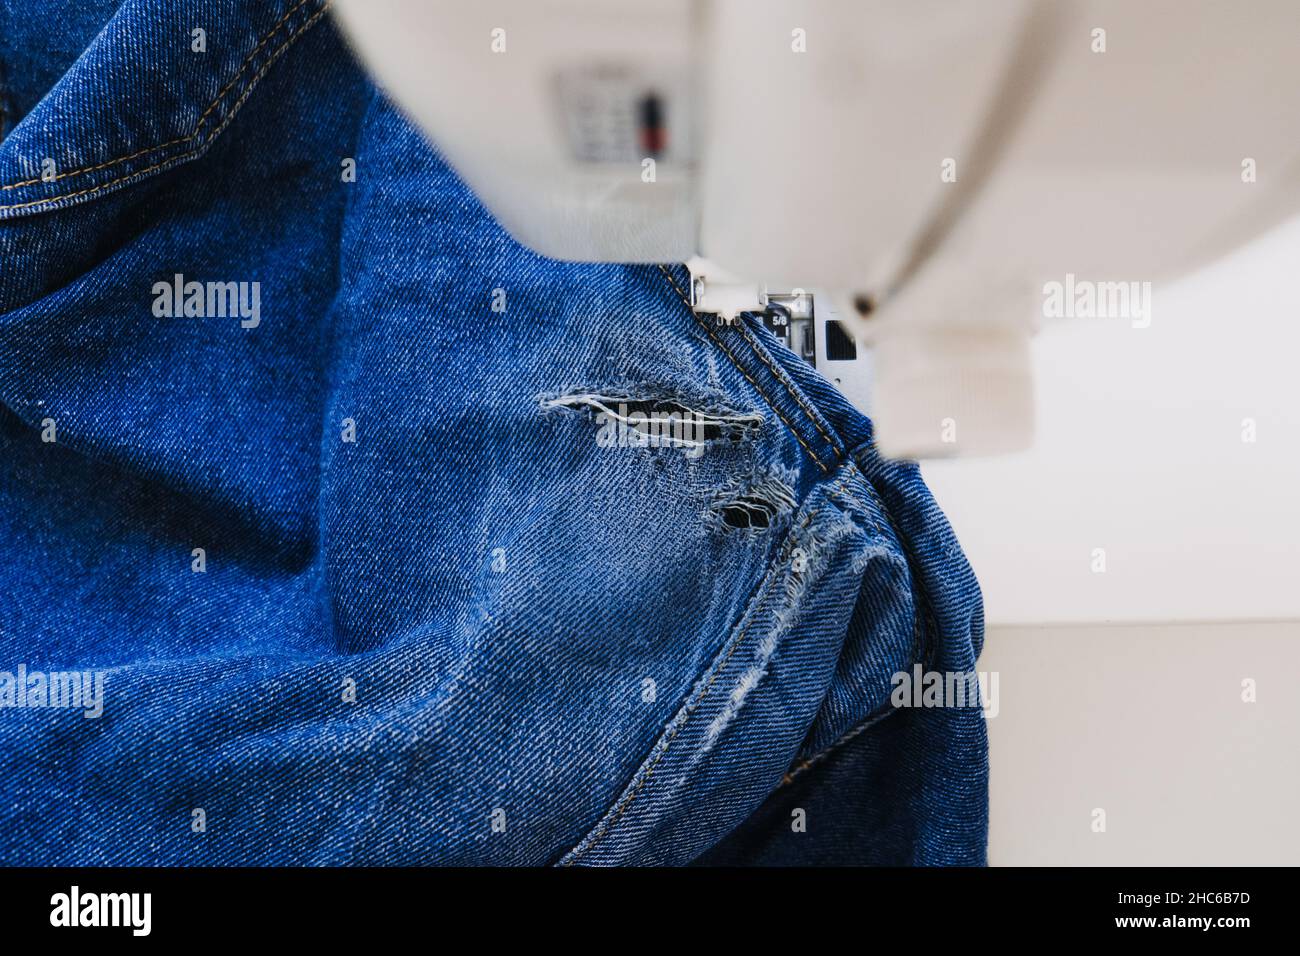 Reuse, repair, upcycle. Denim upcycling ideas, repair and using old jeans.  Close-up of sewing machine with shabby, old, torn denim jeans fabric Stock  Photo - Alamy